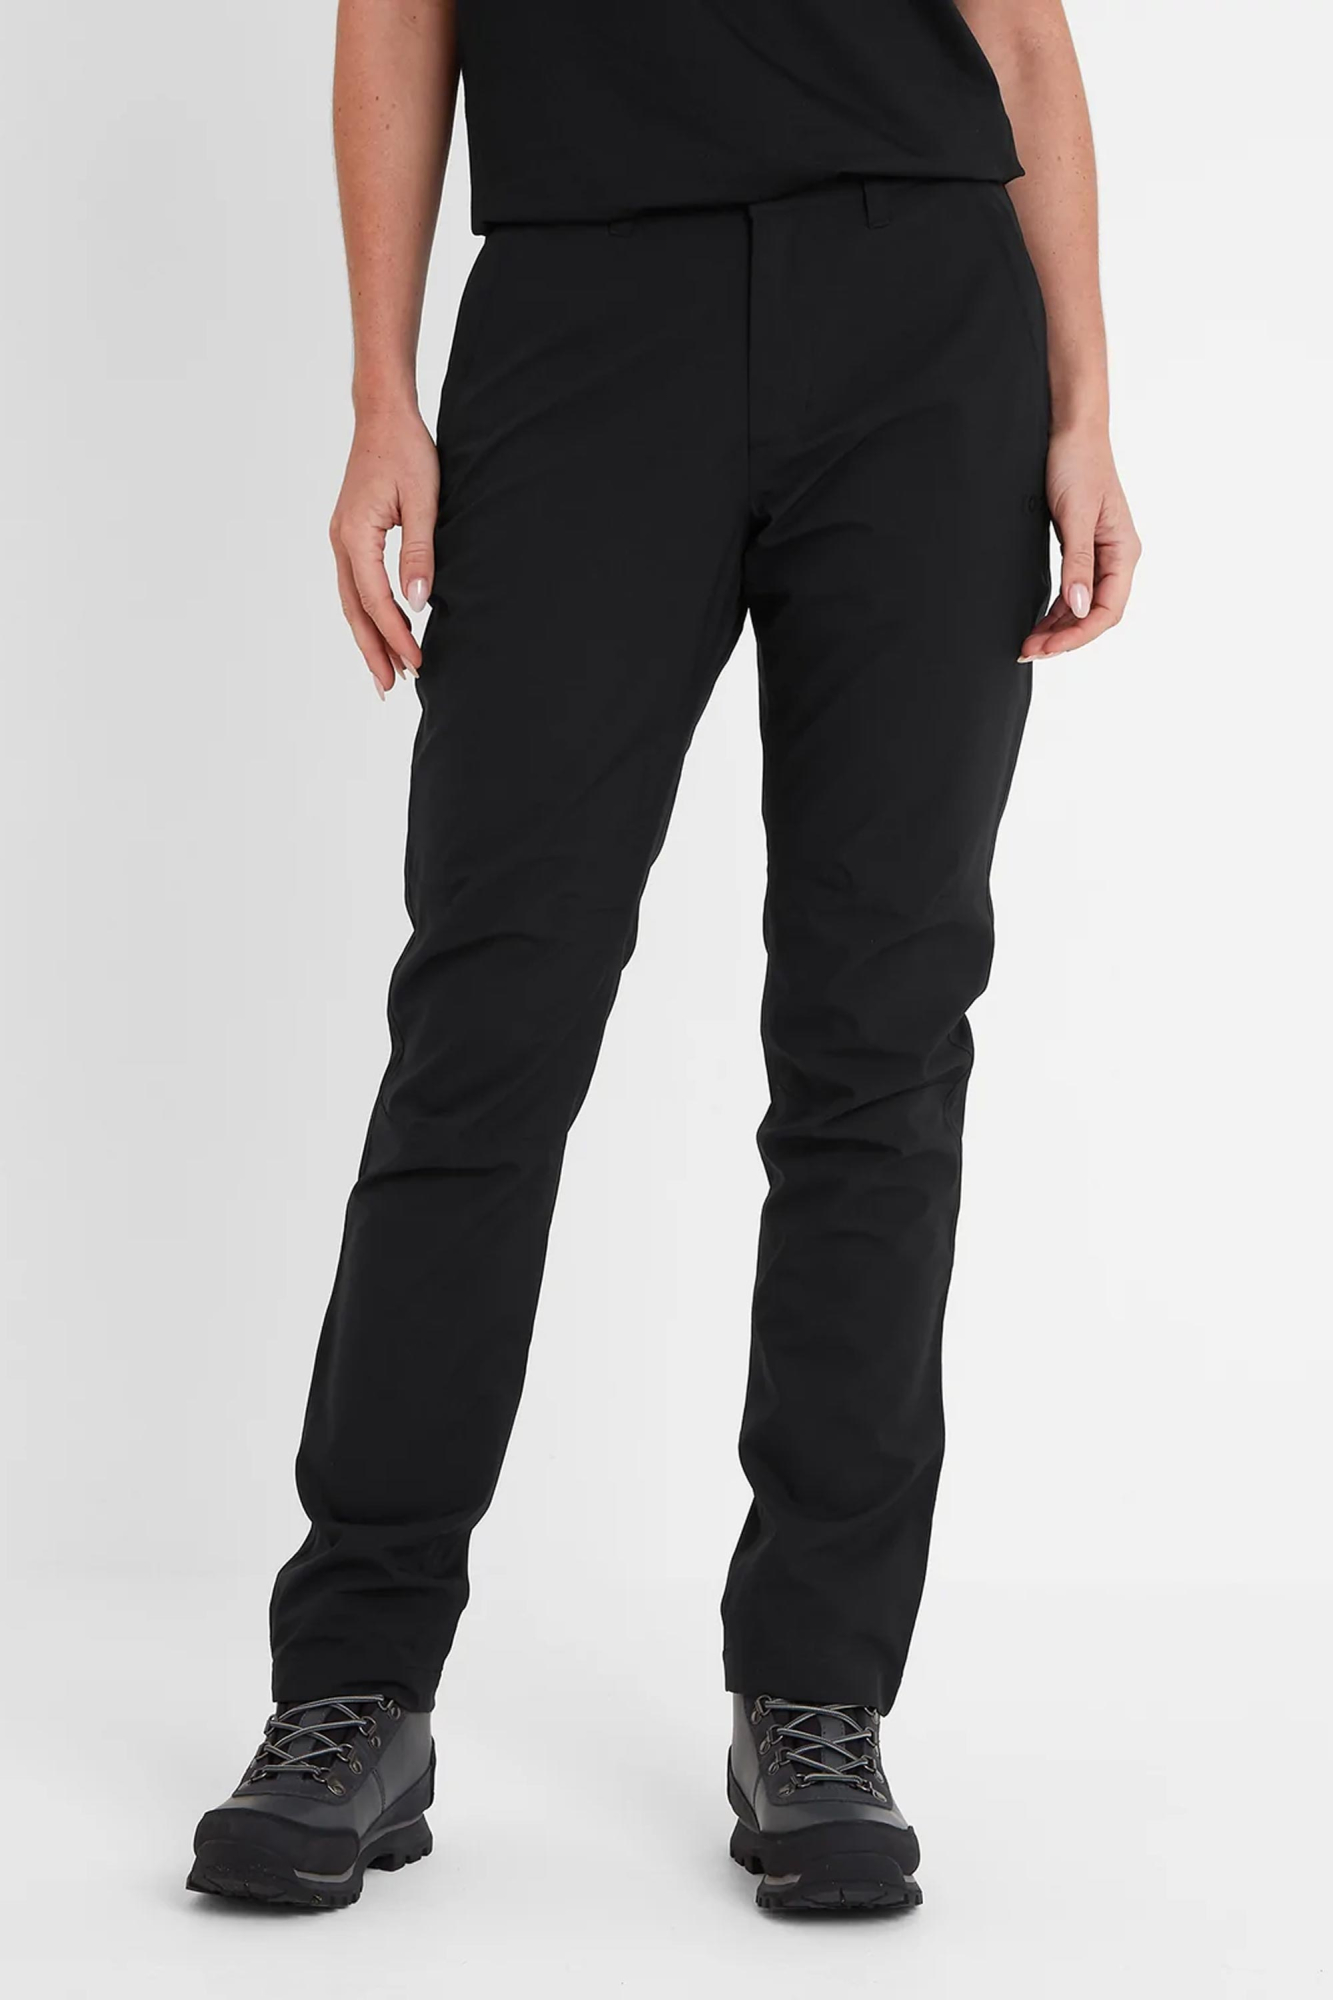 Silsden Waterproof Trousers - Size: 16S No Colour Tog24